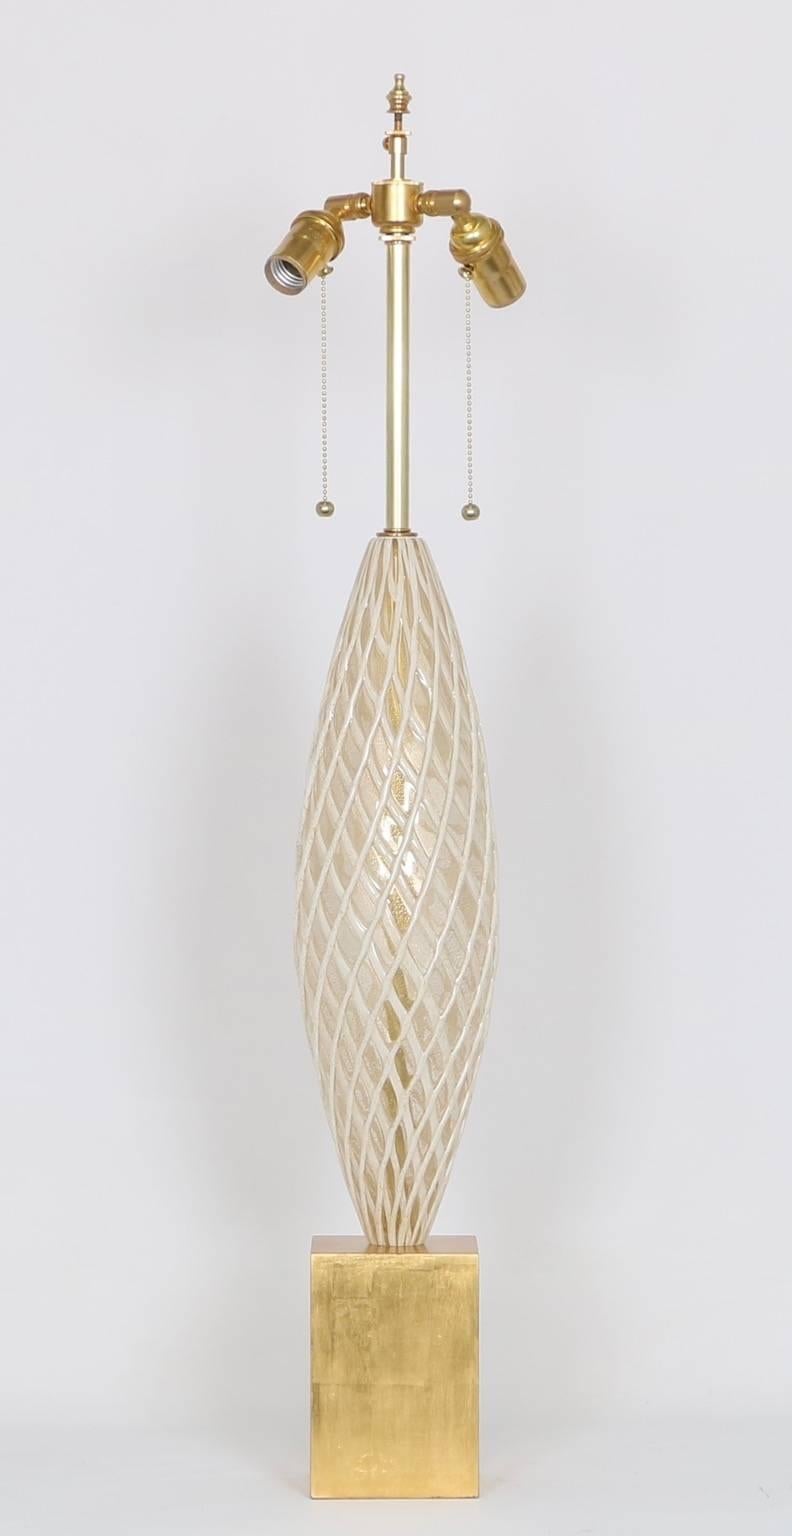 This circa 1950s lamp by Venini is a magnificent sample of Italian Murano art glass, with reticulated white and gold ribbons over clear glass body with gold flakes, mounted on a gilded wood base. The noted height is to the finial. The height to the